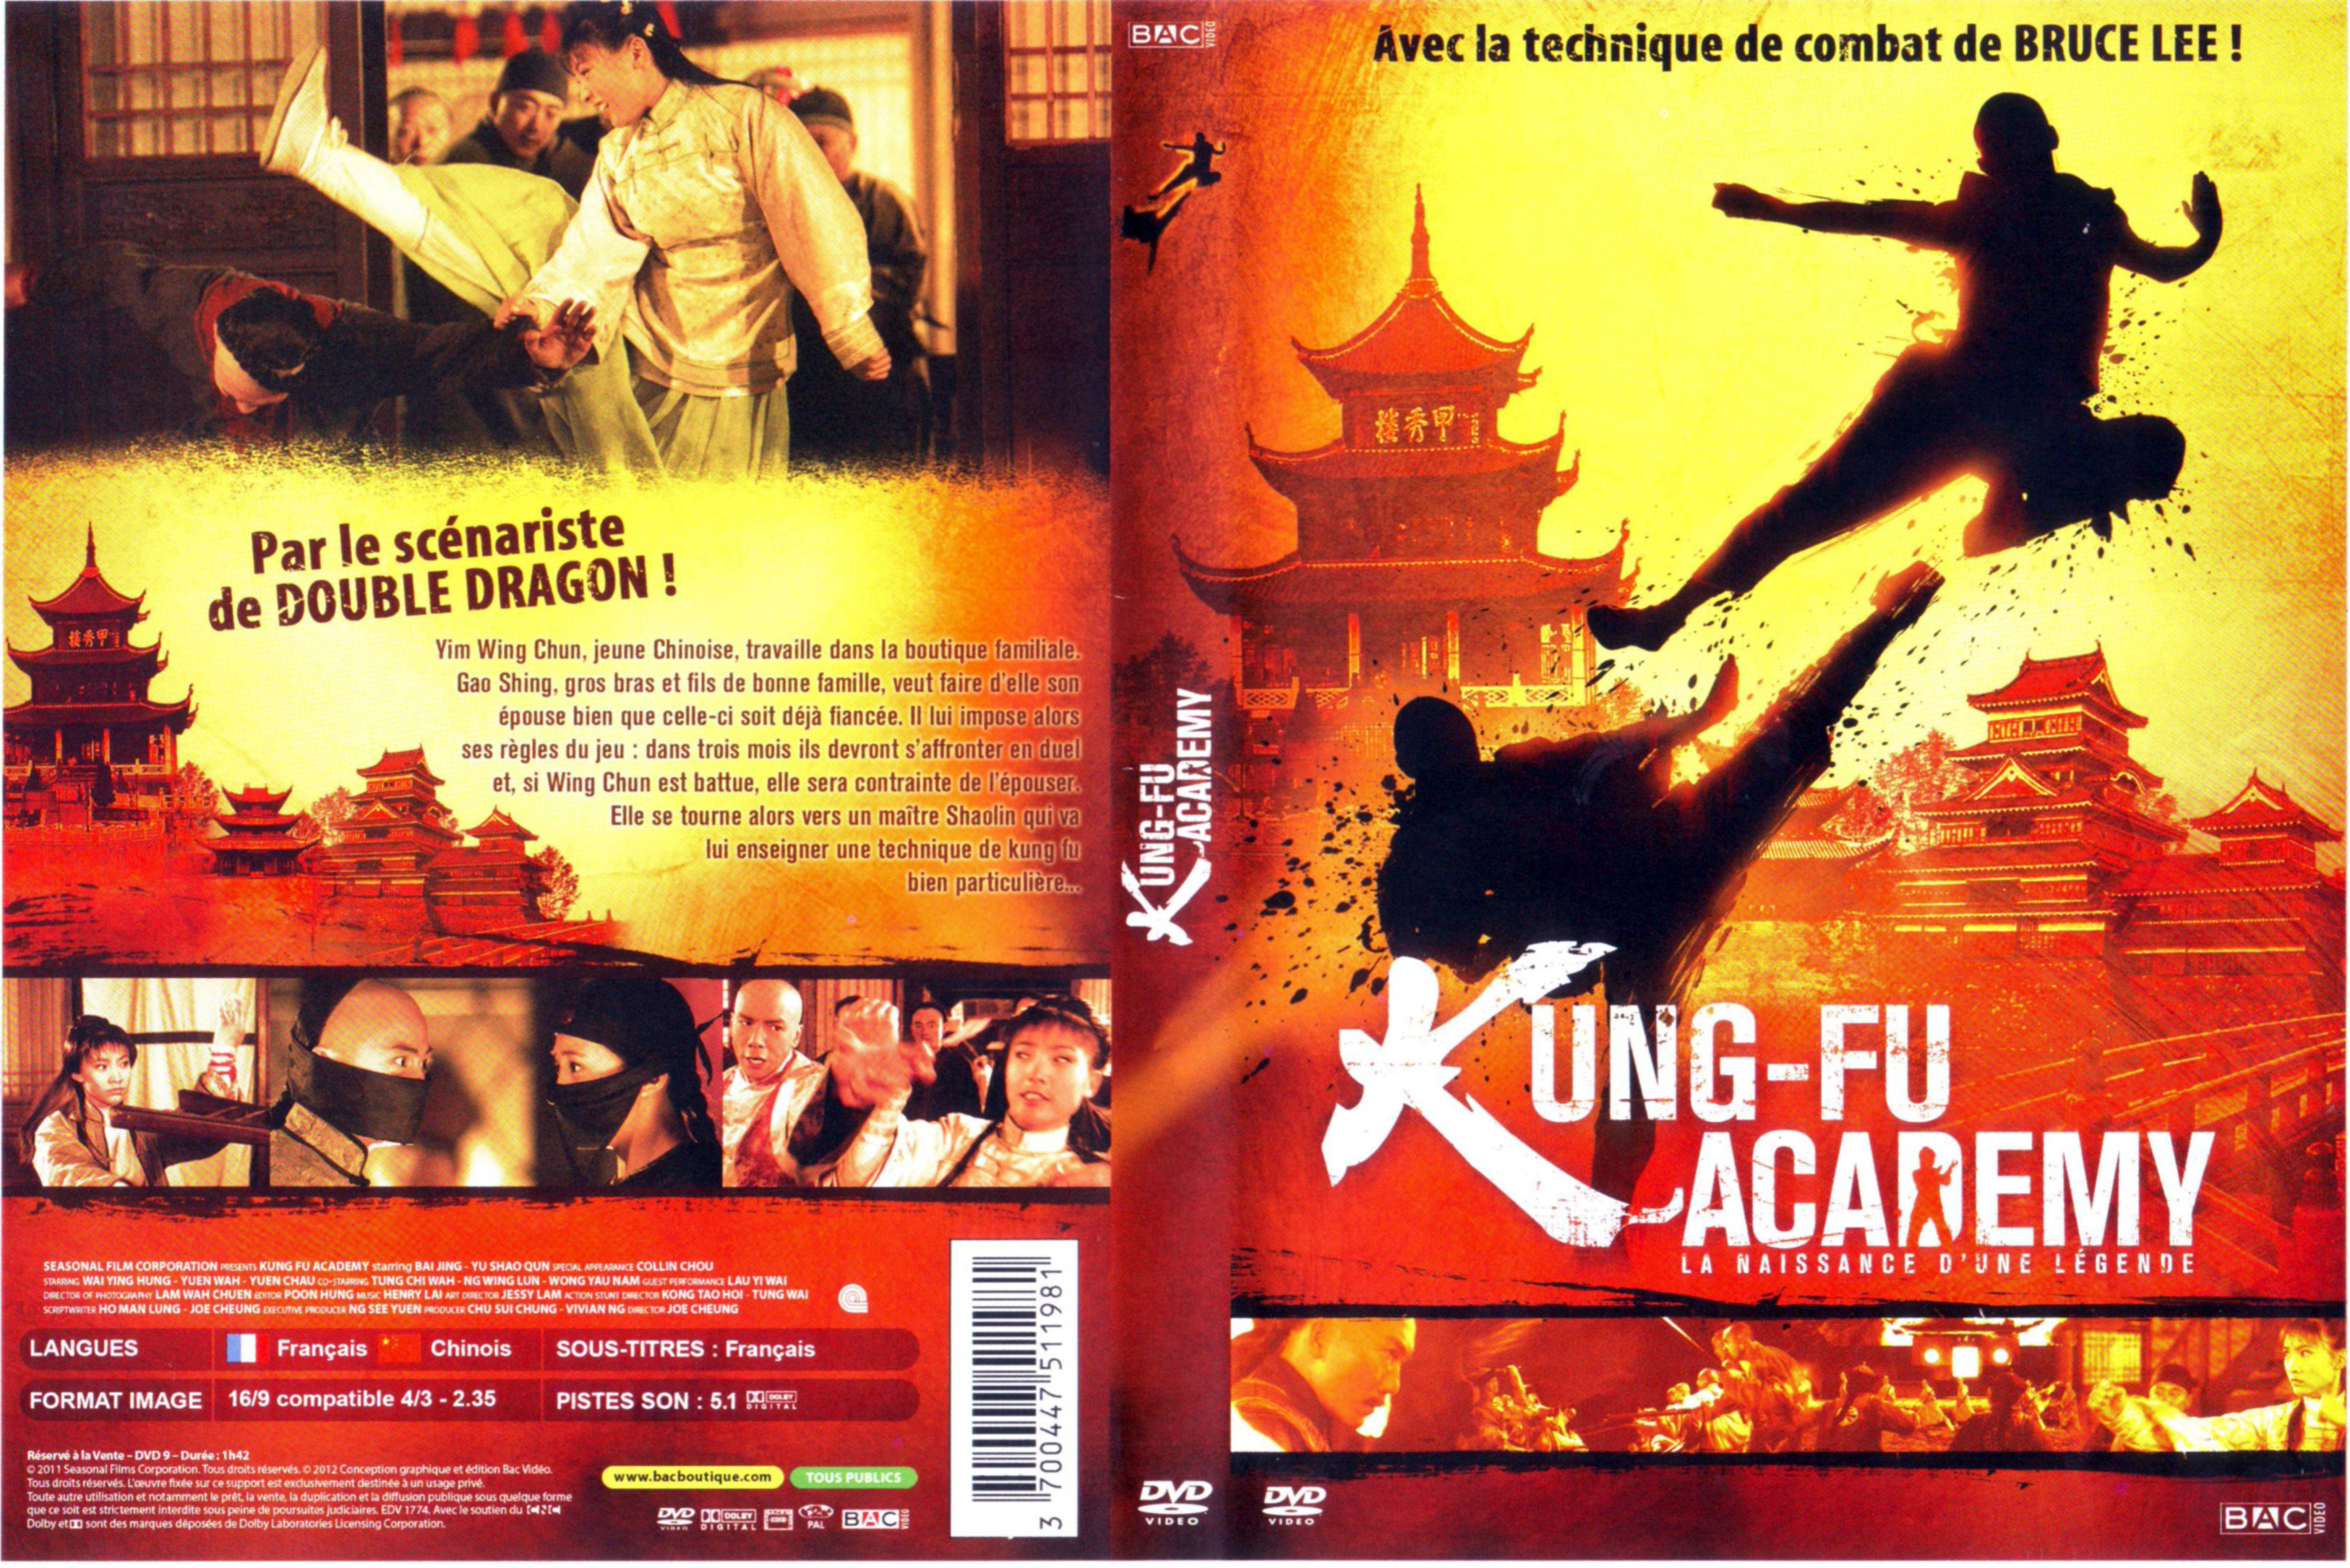 Jaquette DVD Kung-fu academy